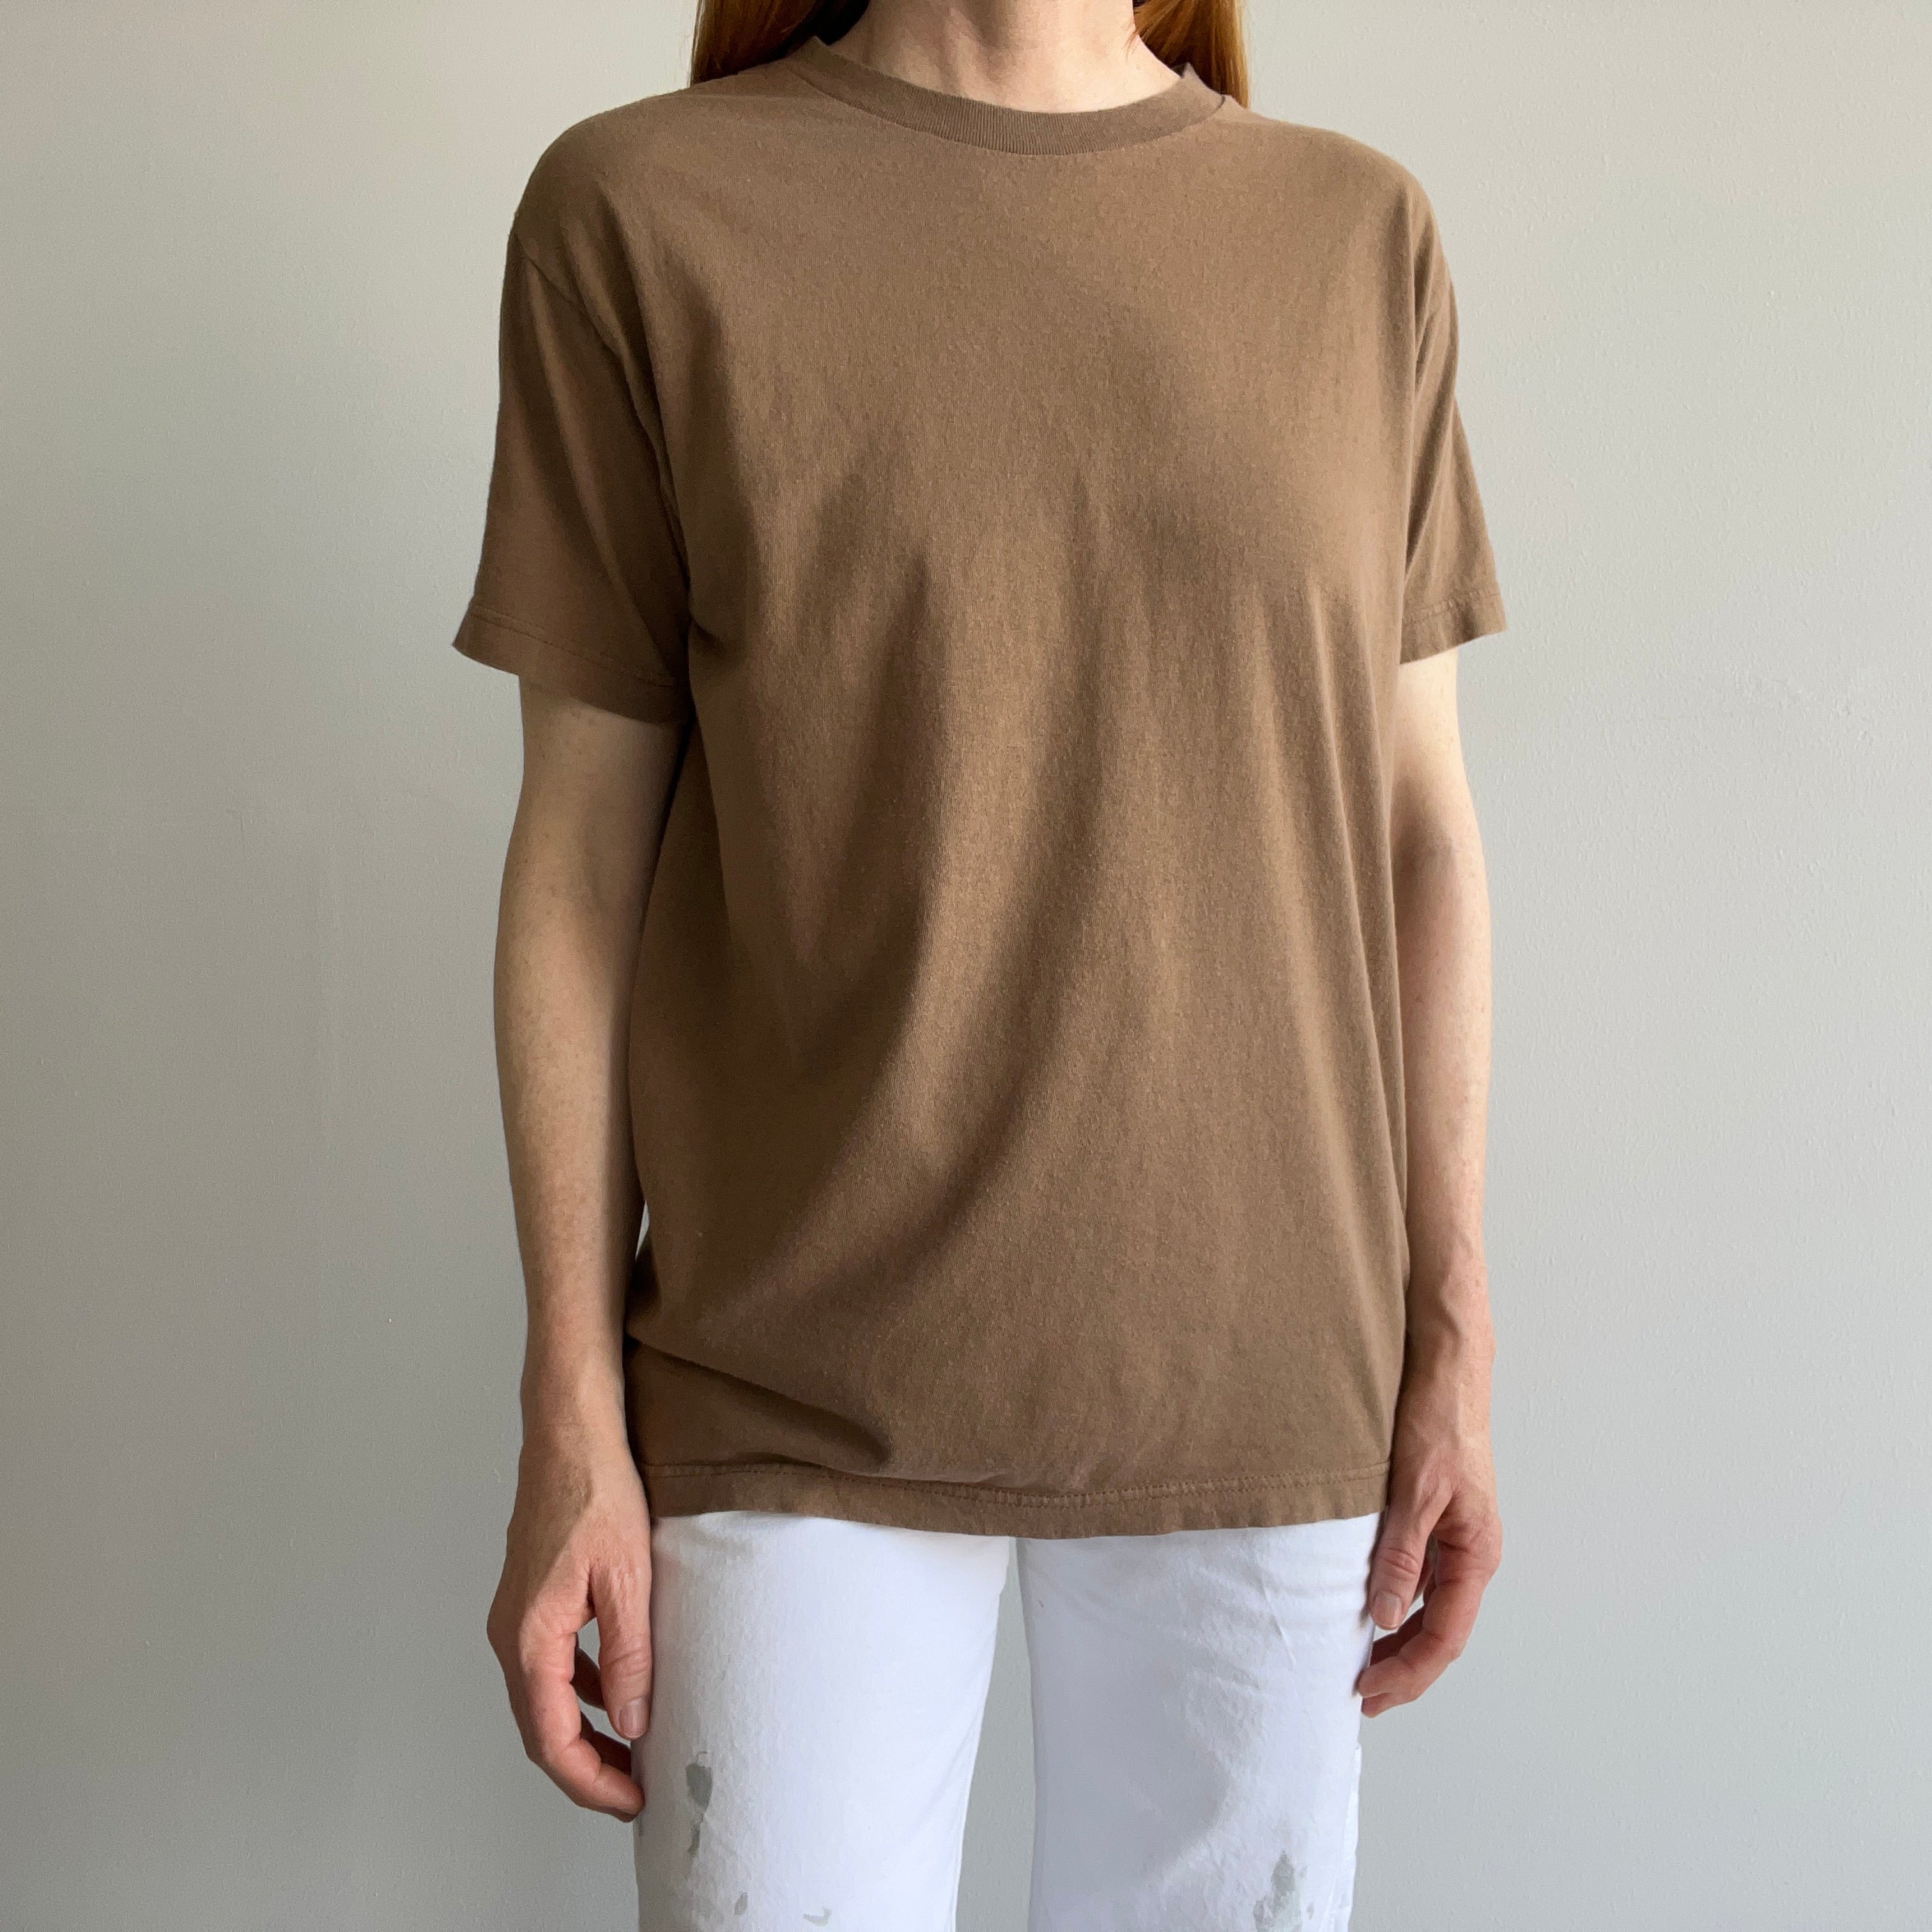 1980s Earth Brown Blank Cotton T-Shirt